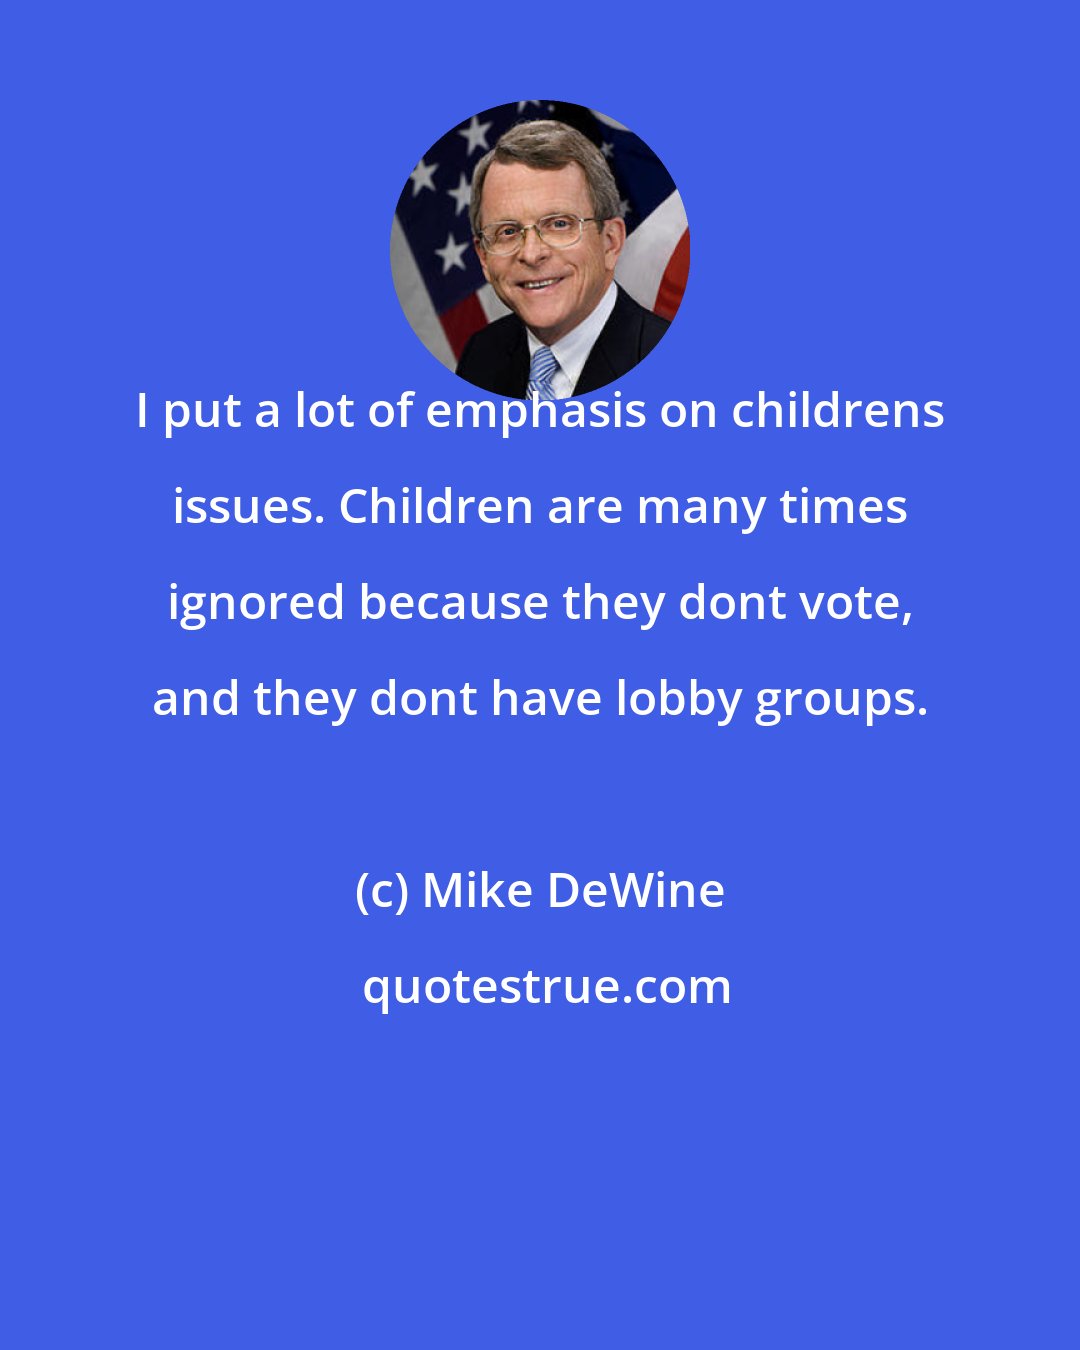 Mike DeWine: I put a lot of emphasis on childrens issues. Children are many times ignored because they dont vote, and they dont have lobby groups.